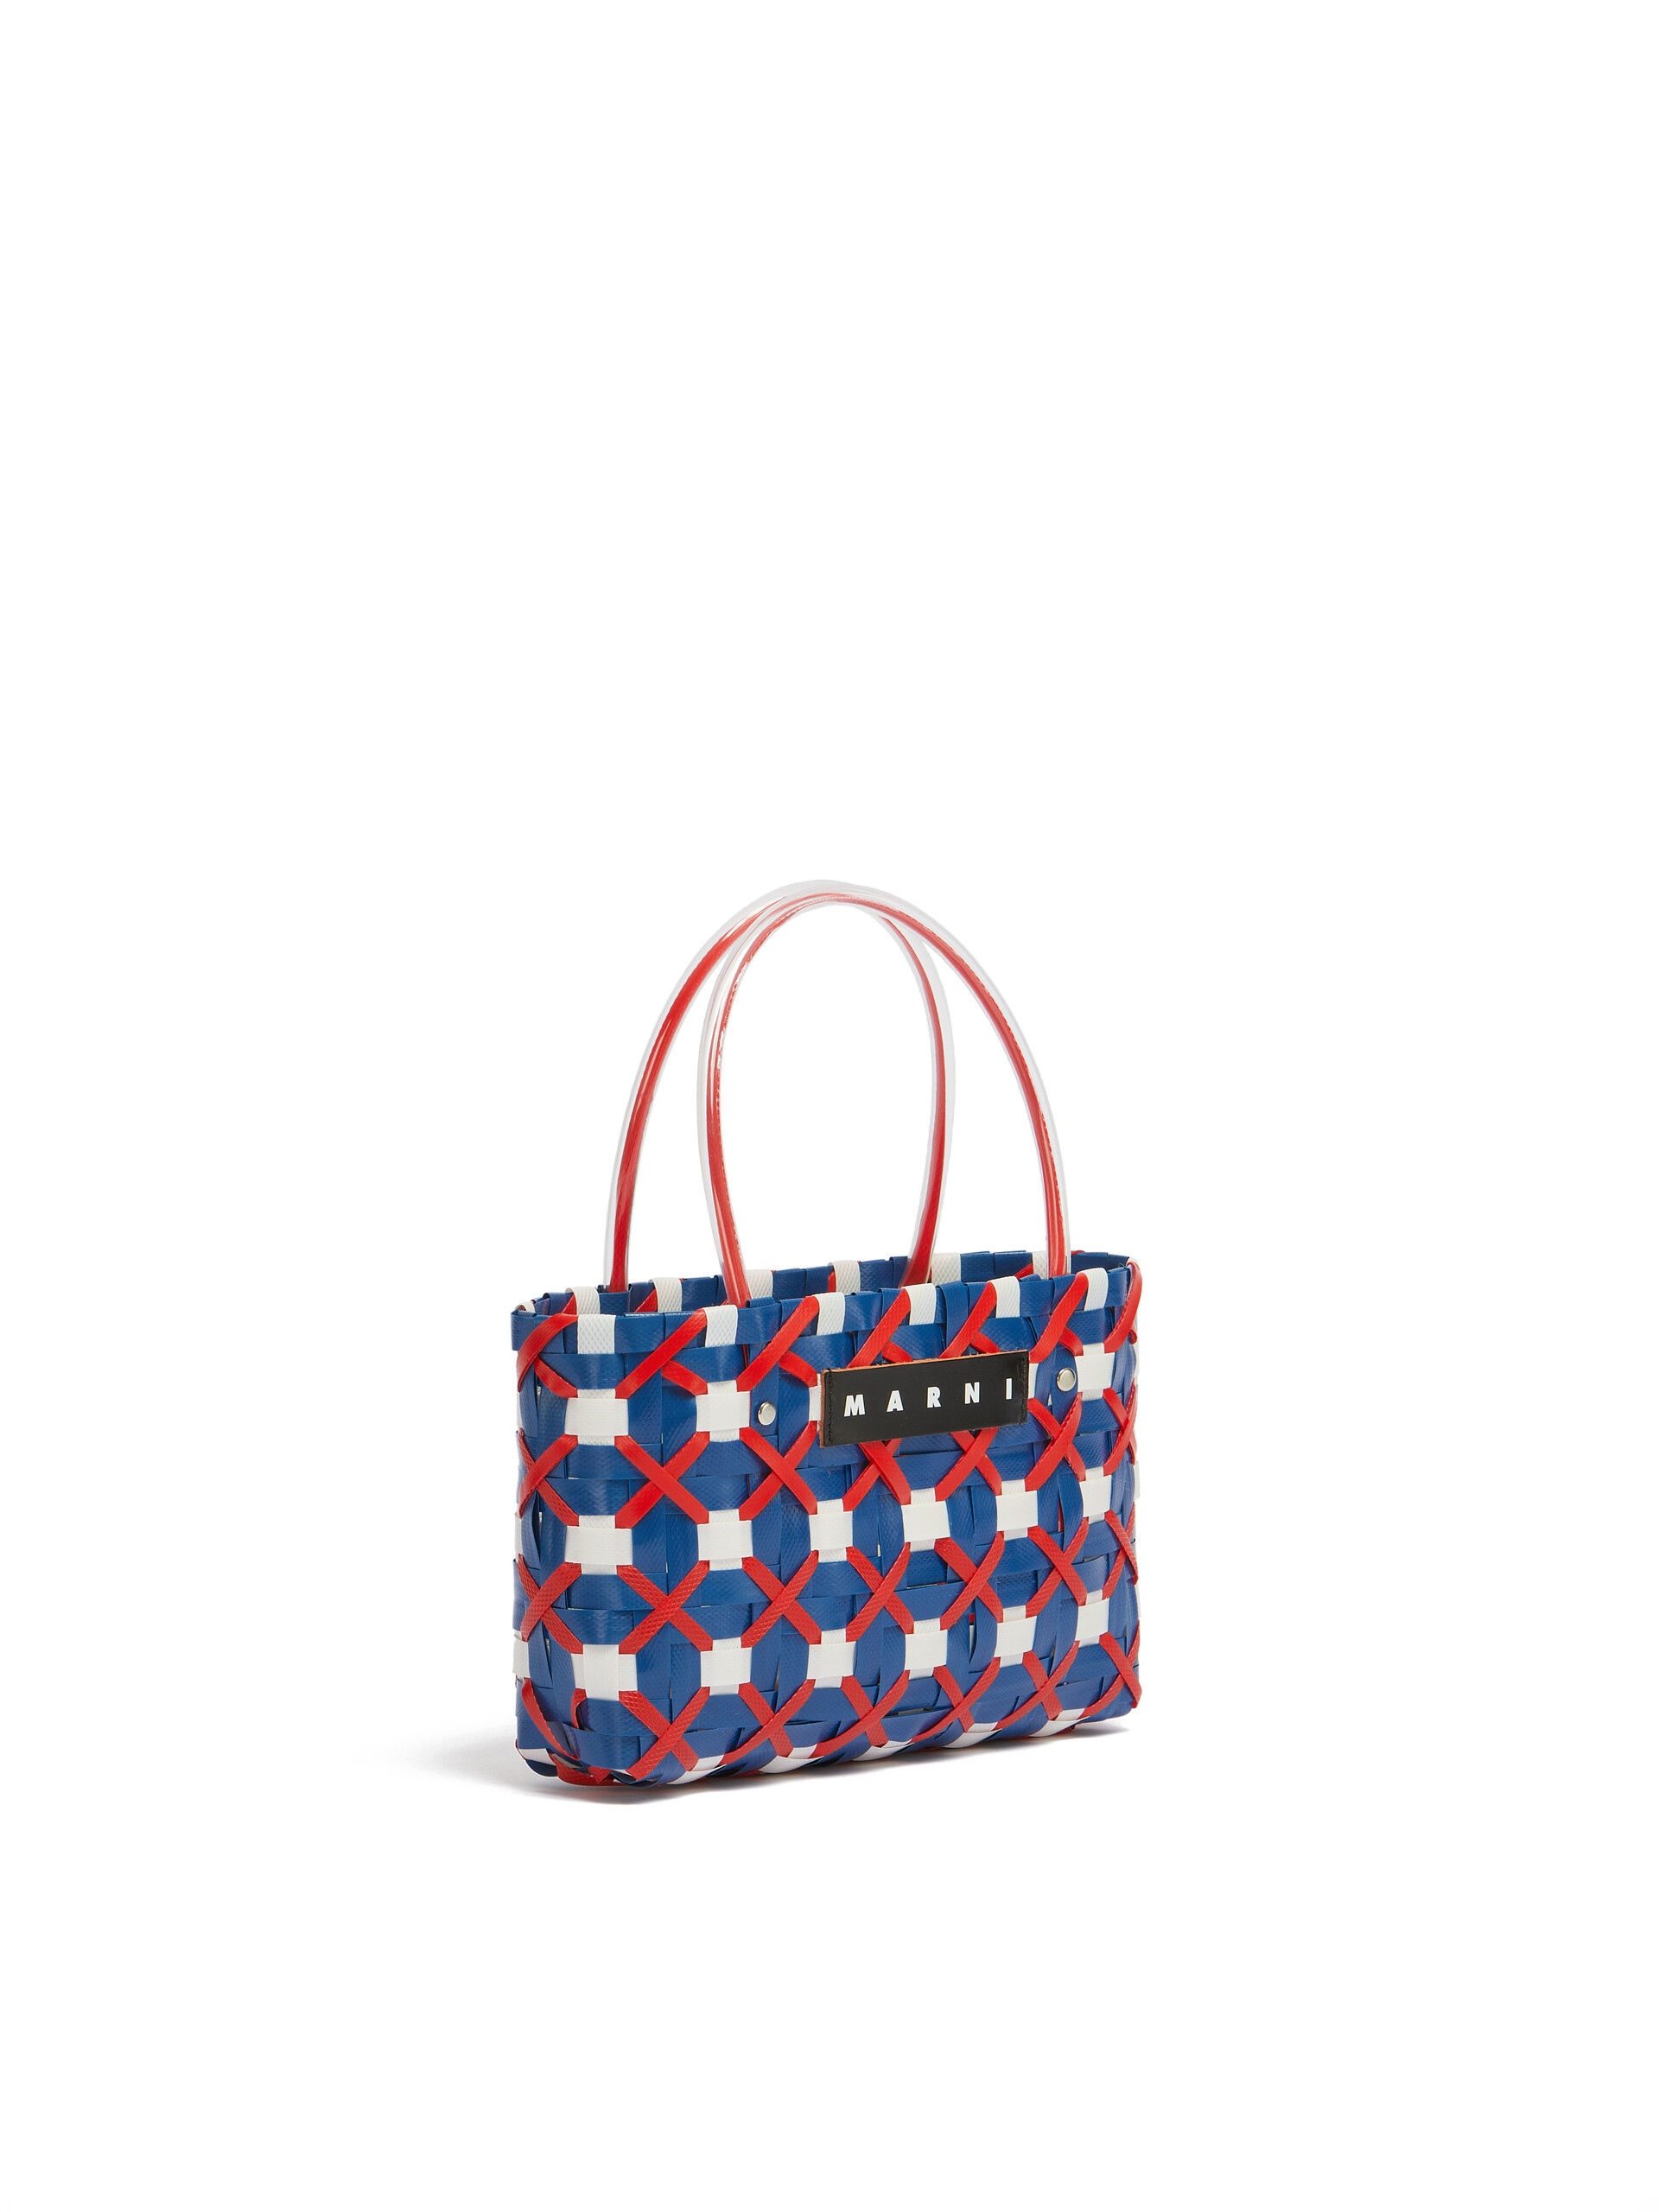 Blue and white criss-cross MARNI MARKET tote bag - Shopping Bags - Image 2